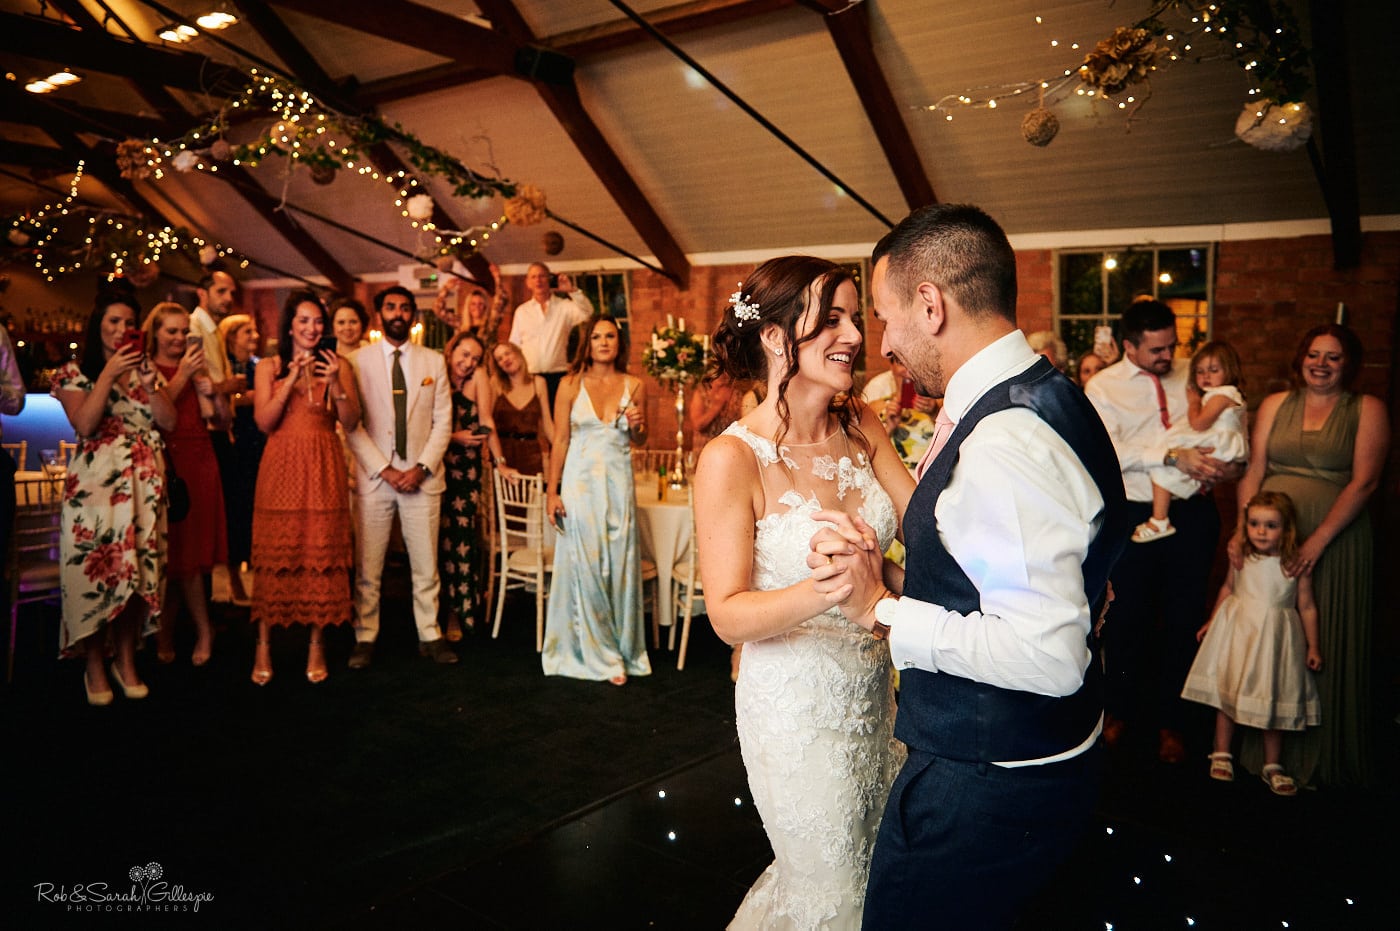 Bride and groom first dance at Gorcott Hall wedding